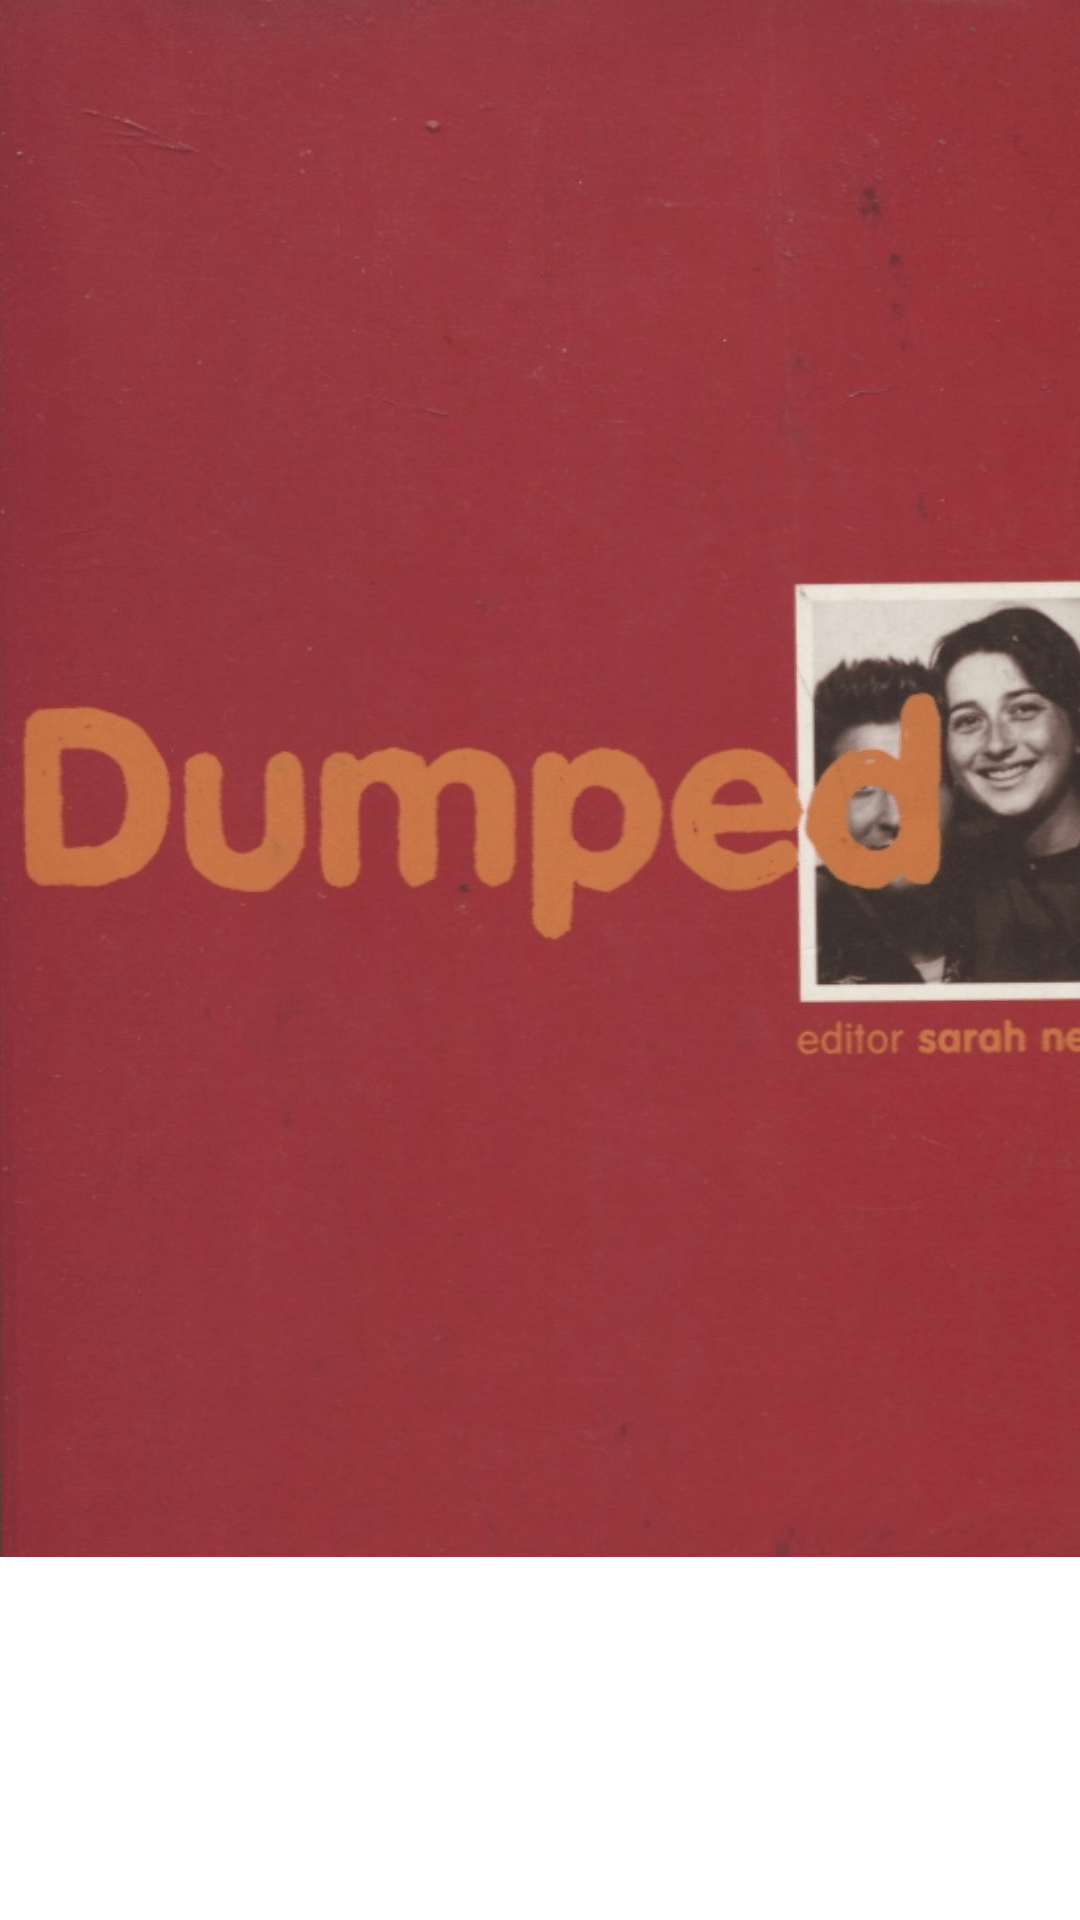 Dumped by Sarah Neal